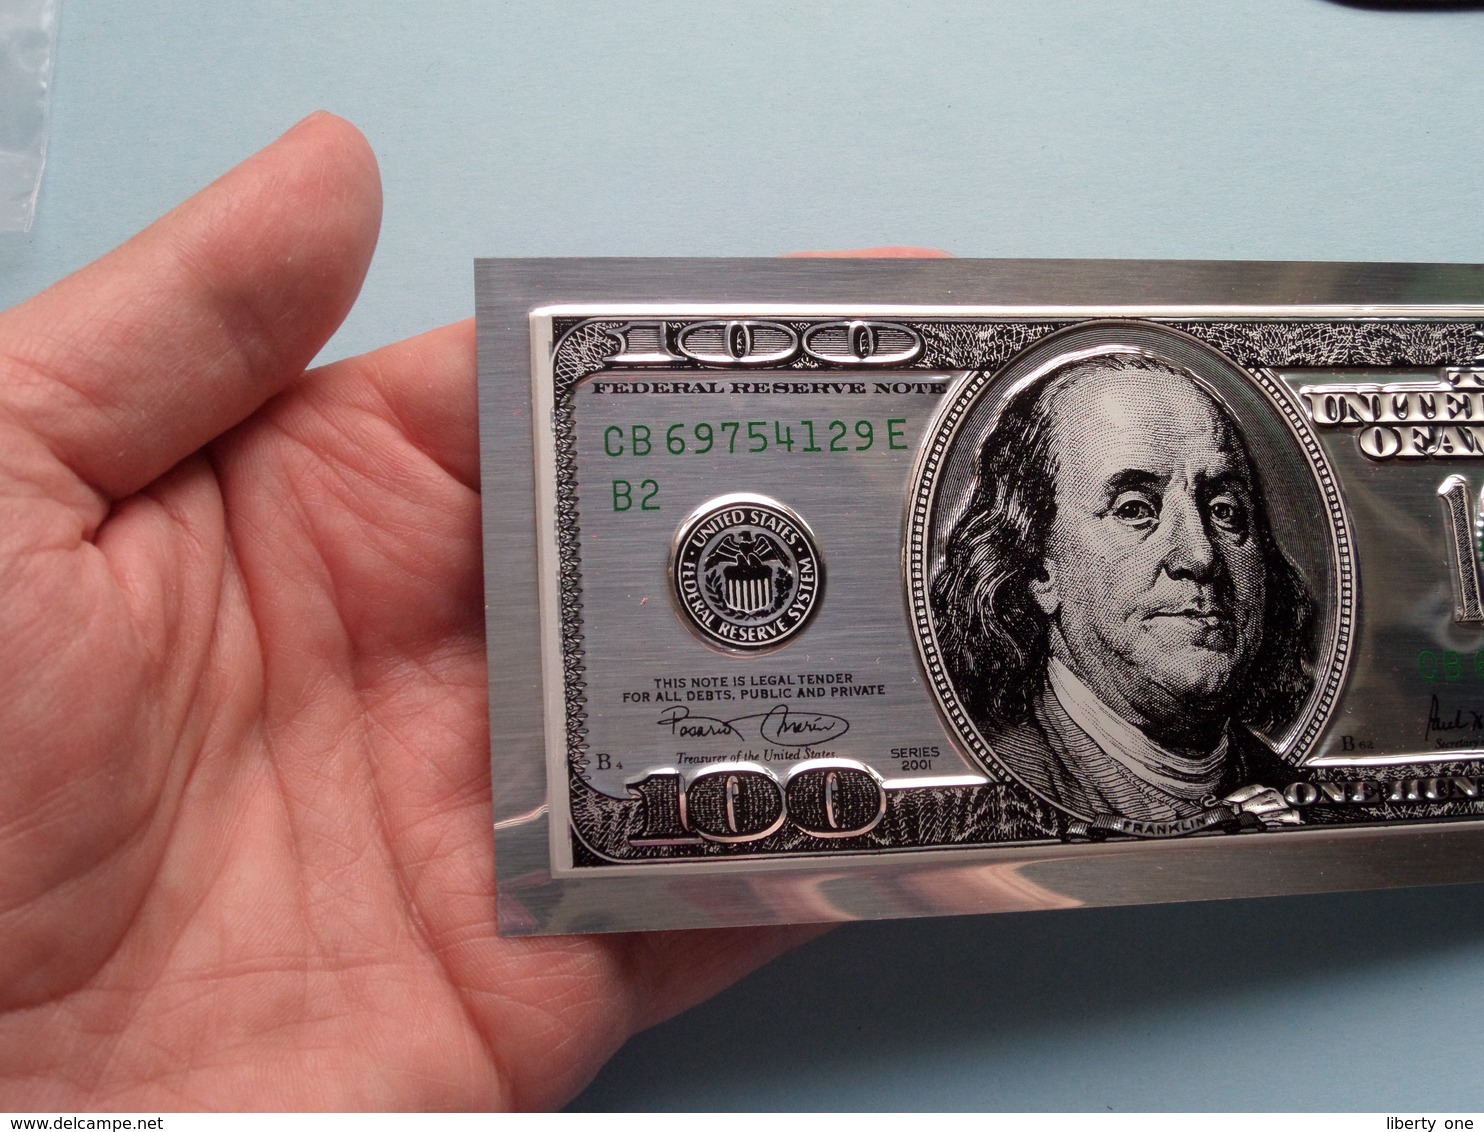 Silver Plated ONE HUNDRED DOLLARS ( Series 2001 ) CB 69754129 E - B2 ( Please Identify ) ! - Unidentified